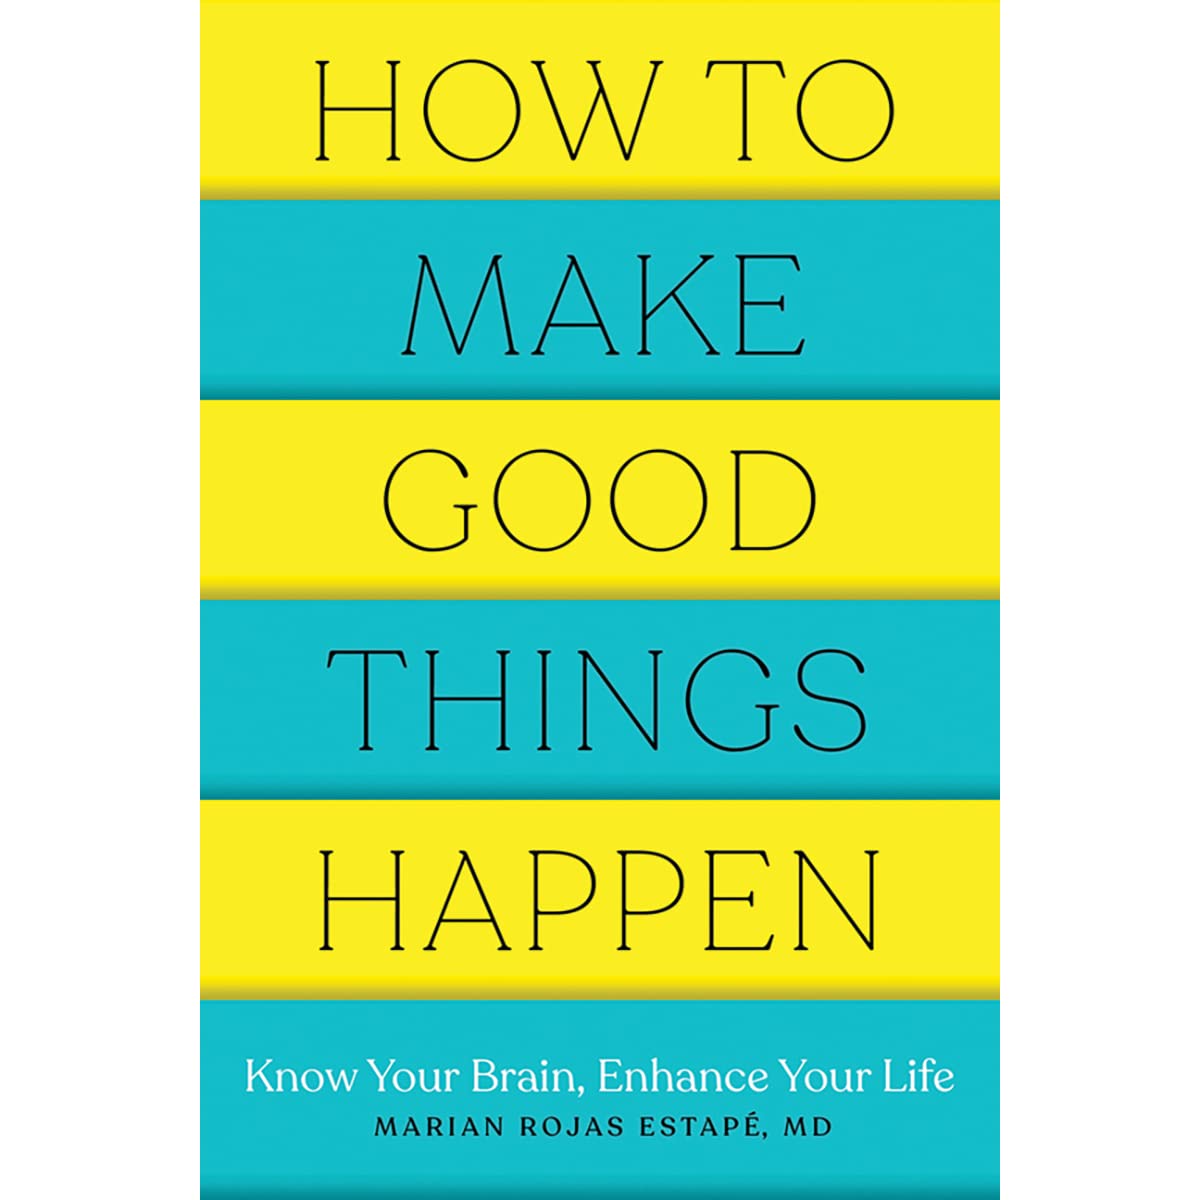 How To Make Good Things Happen: Know Your Brain, Enhance Your Life By Marian Rojas Estape